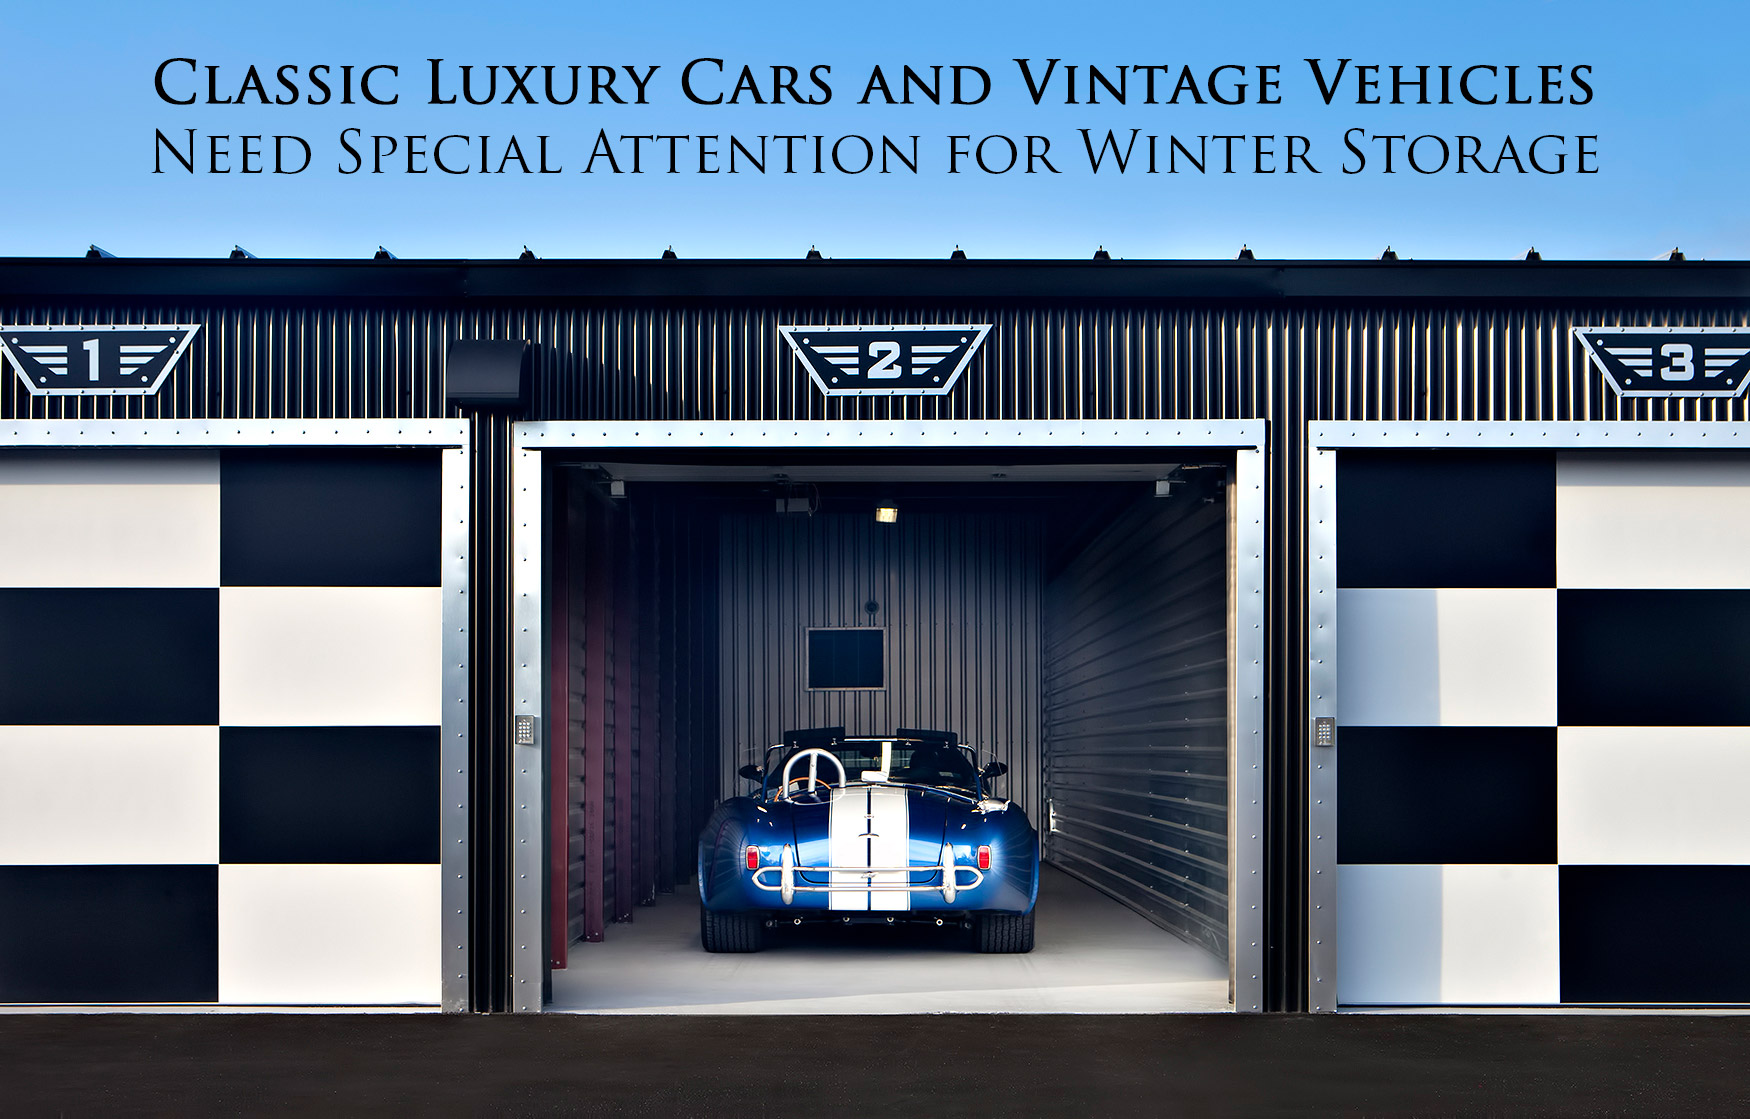 Classic Luxury Cars and Vintage Vehicles Need Special Attention for Winter Storage